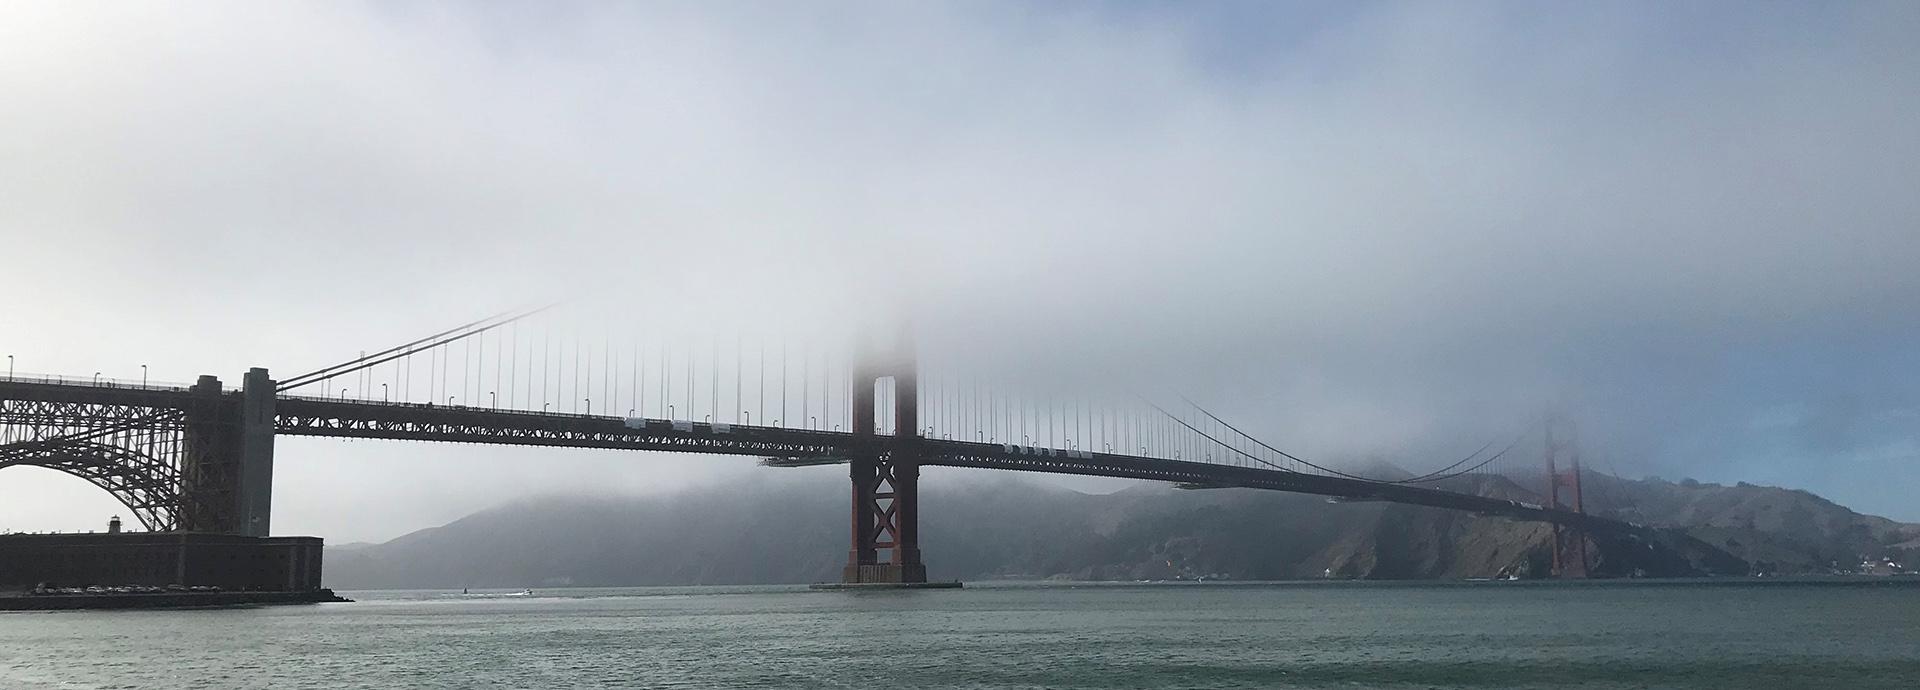 Golden gate on a foggy day.